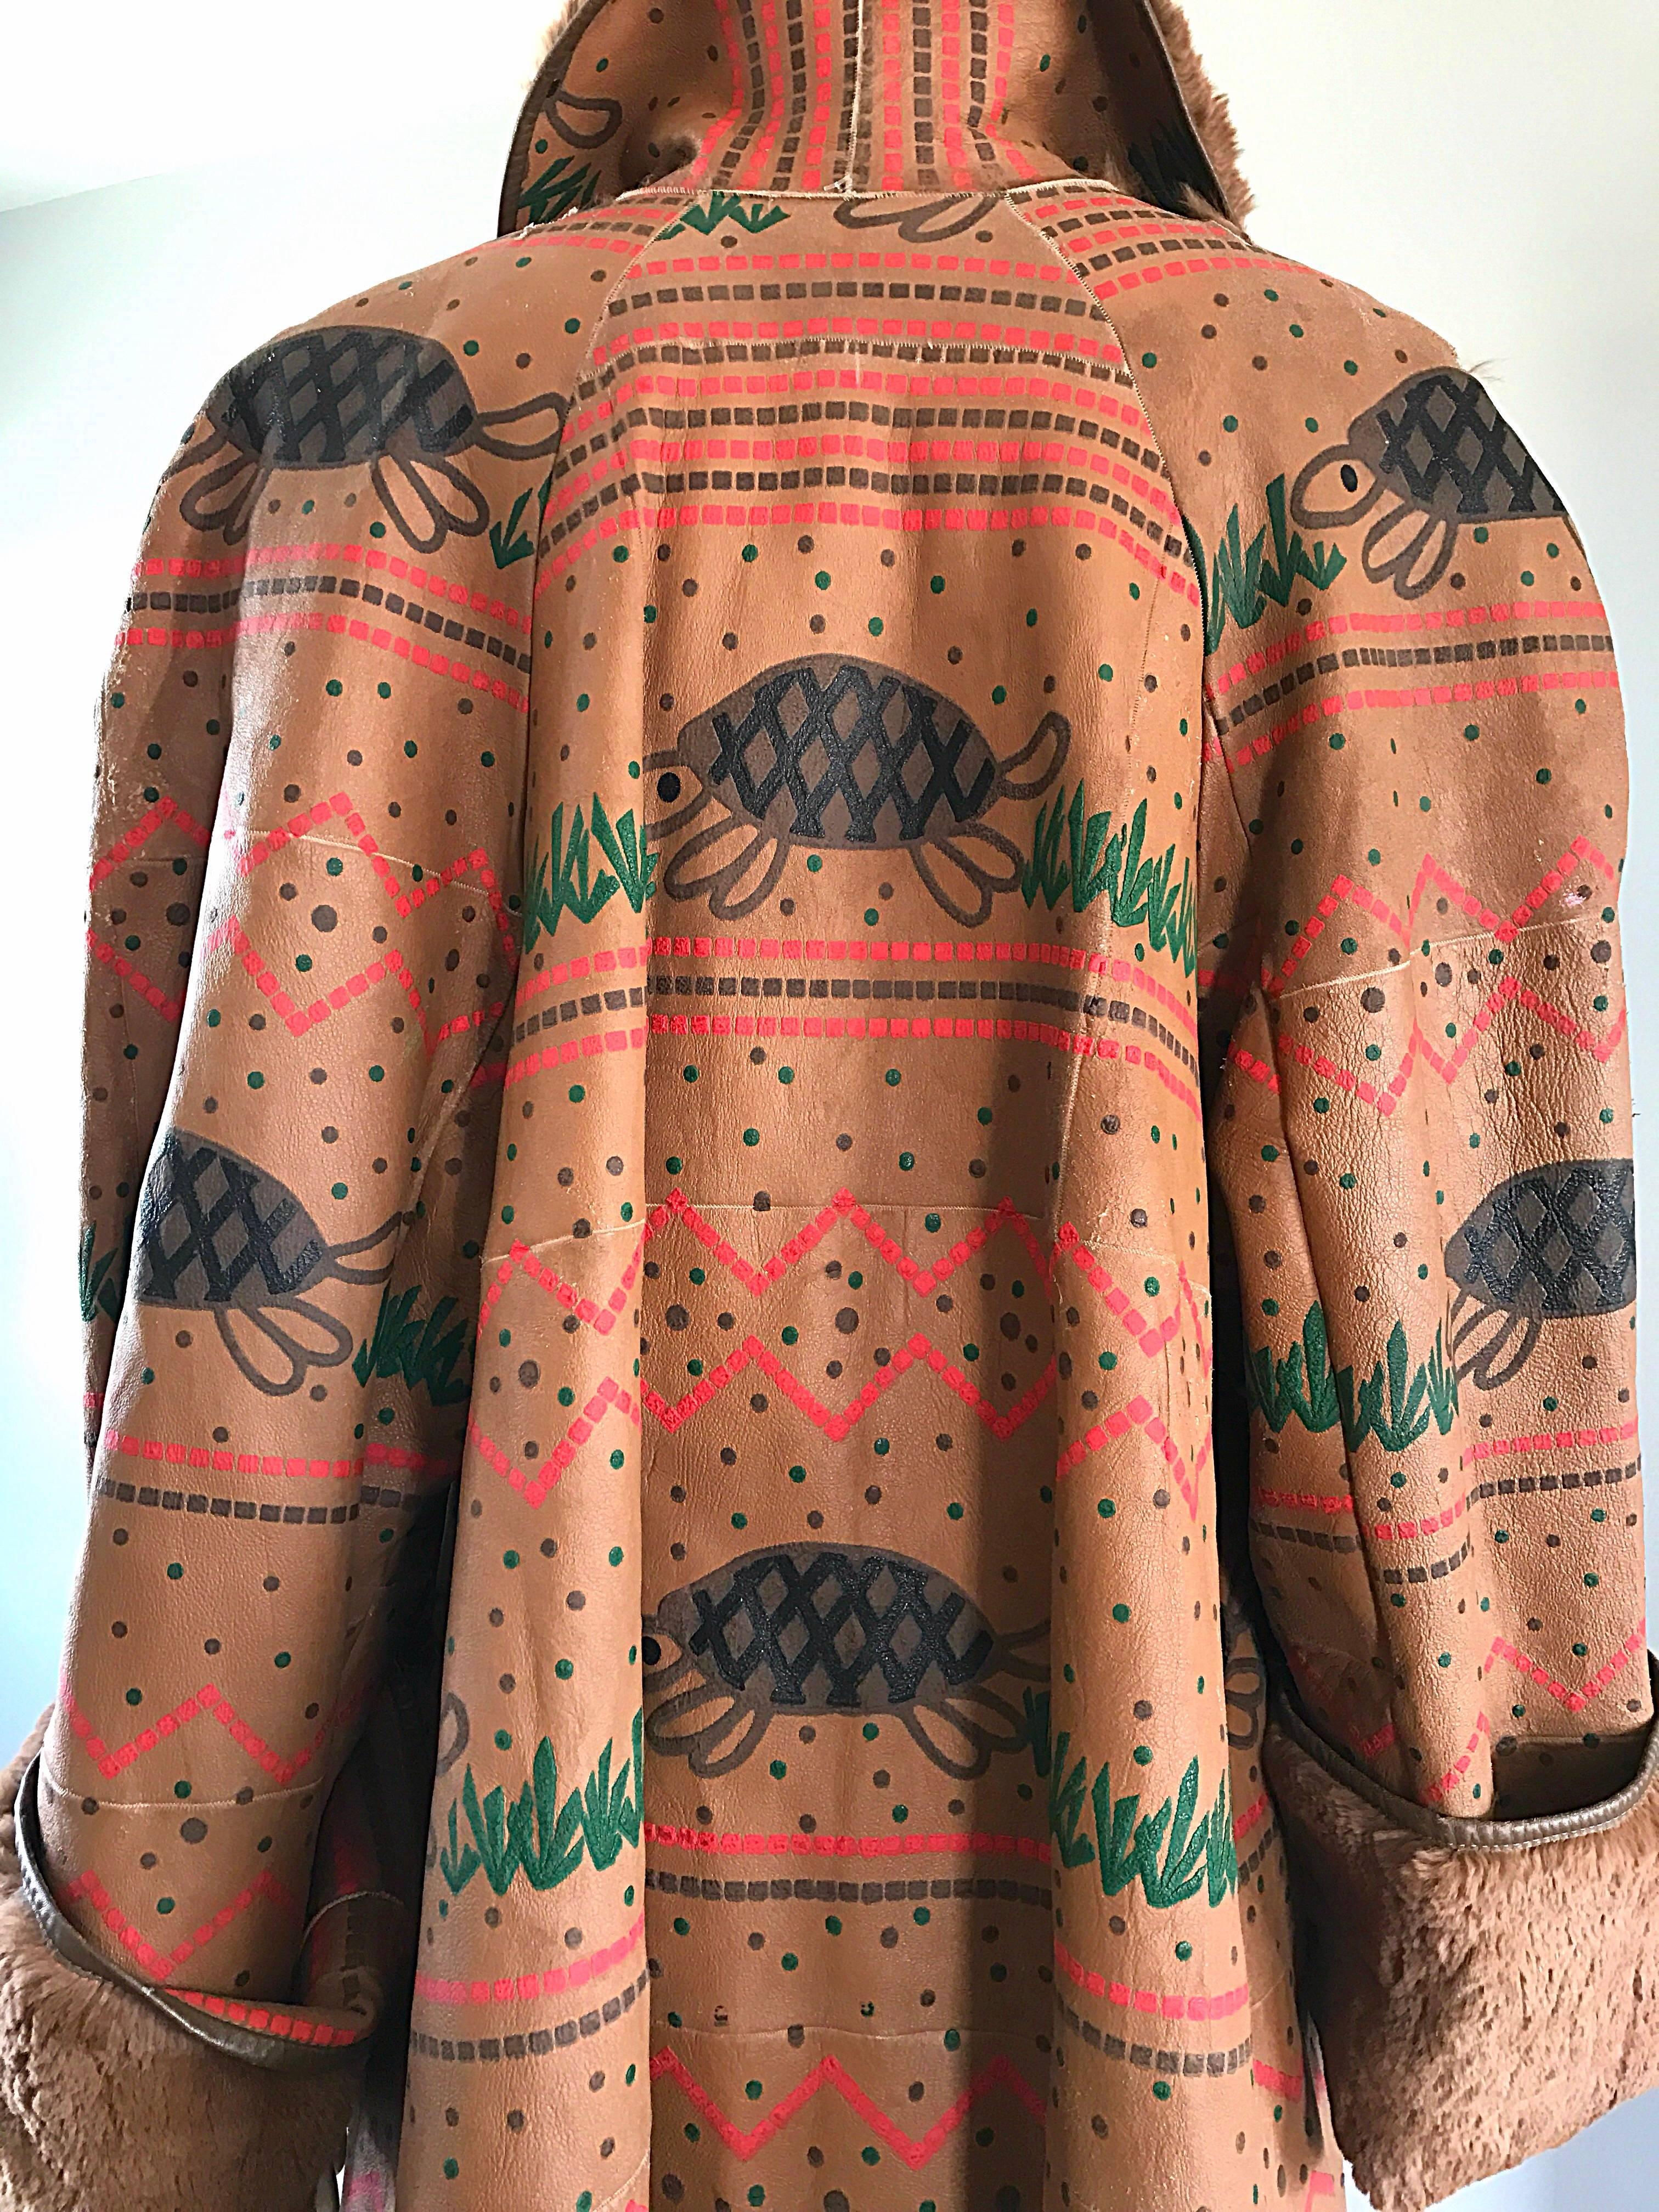 Rare Vintage Jean Charles de Castelbajac Hand Painted Leather Shearling Jacket In Good Condition For Sale In San Diego, CA